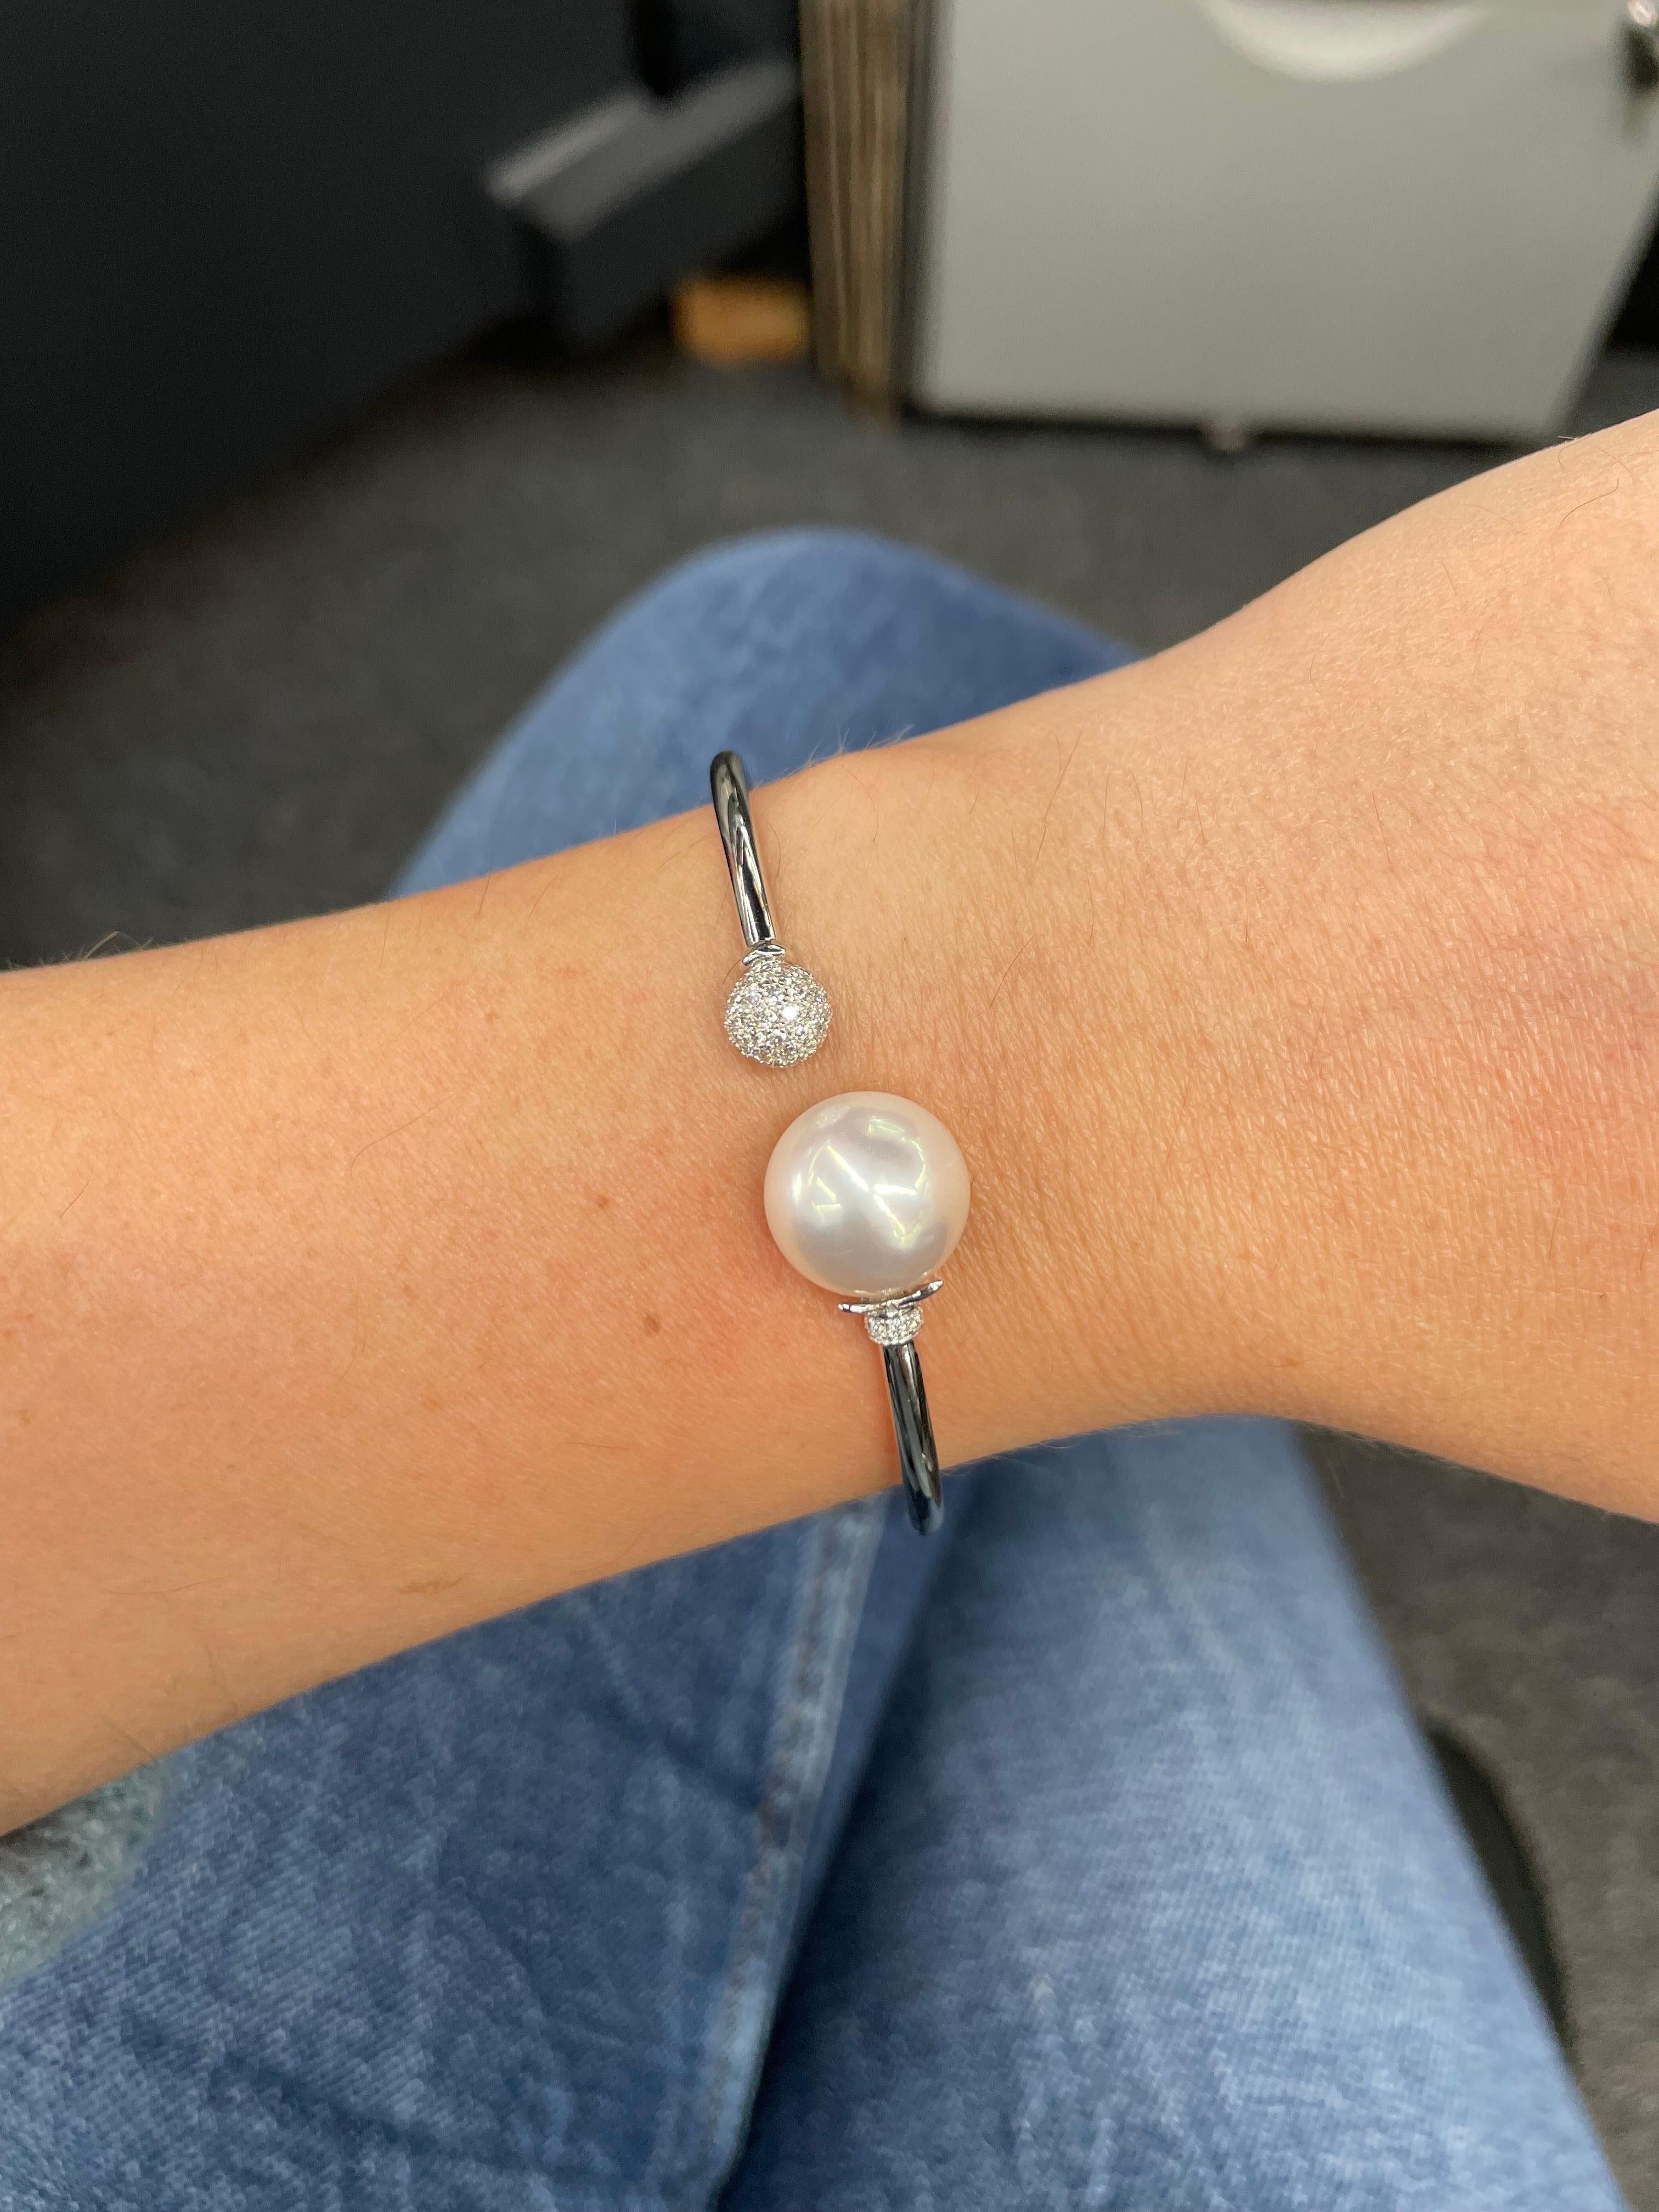 18 Karat White gold open cuff bangle featuring one South Sea Pearl measuring 12-13 MM and a diamond ball motif containing 50 round brilliants weighing 0.40 carats.
Can customize in different gold color & pearl.
DM for more information